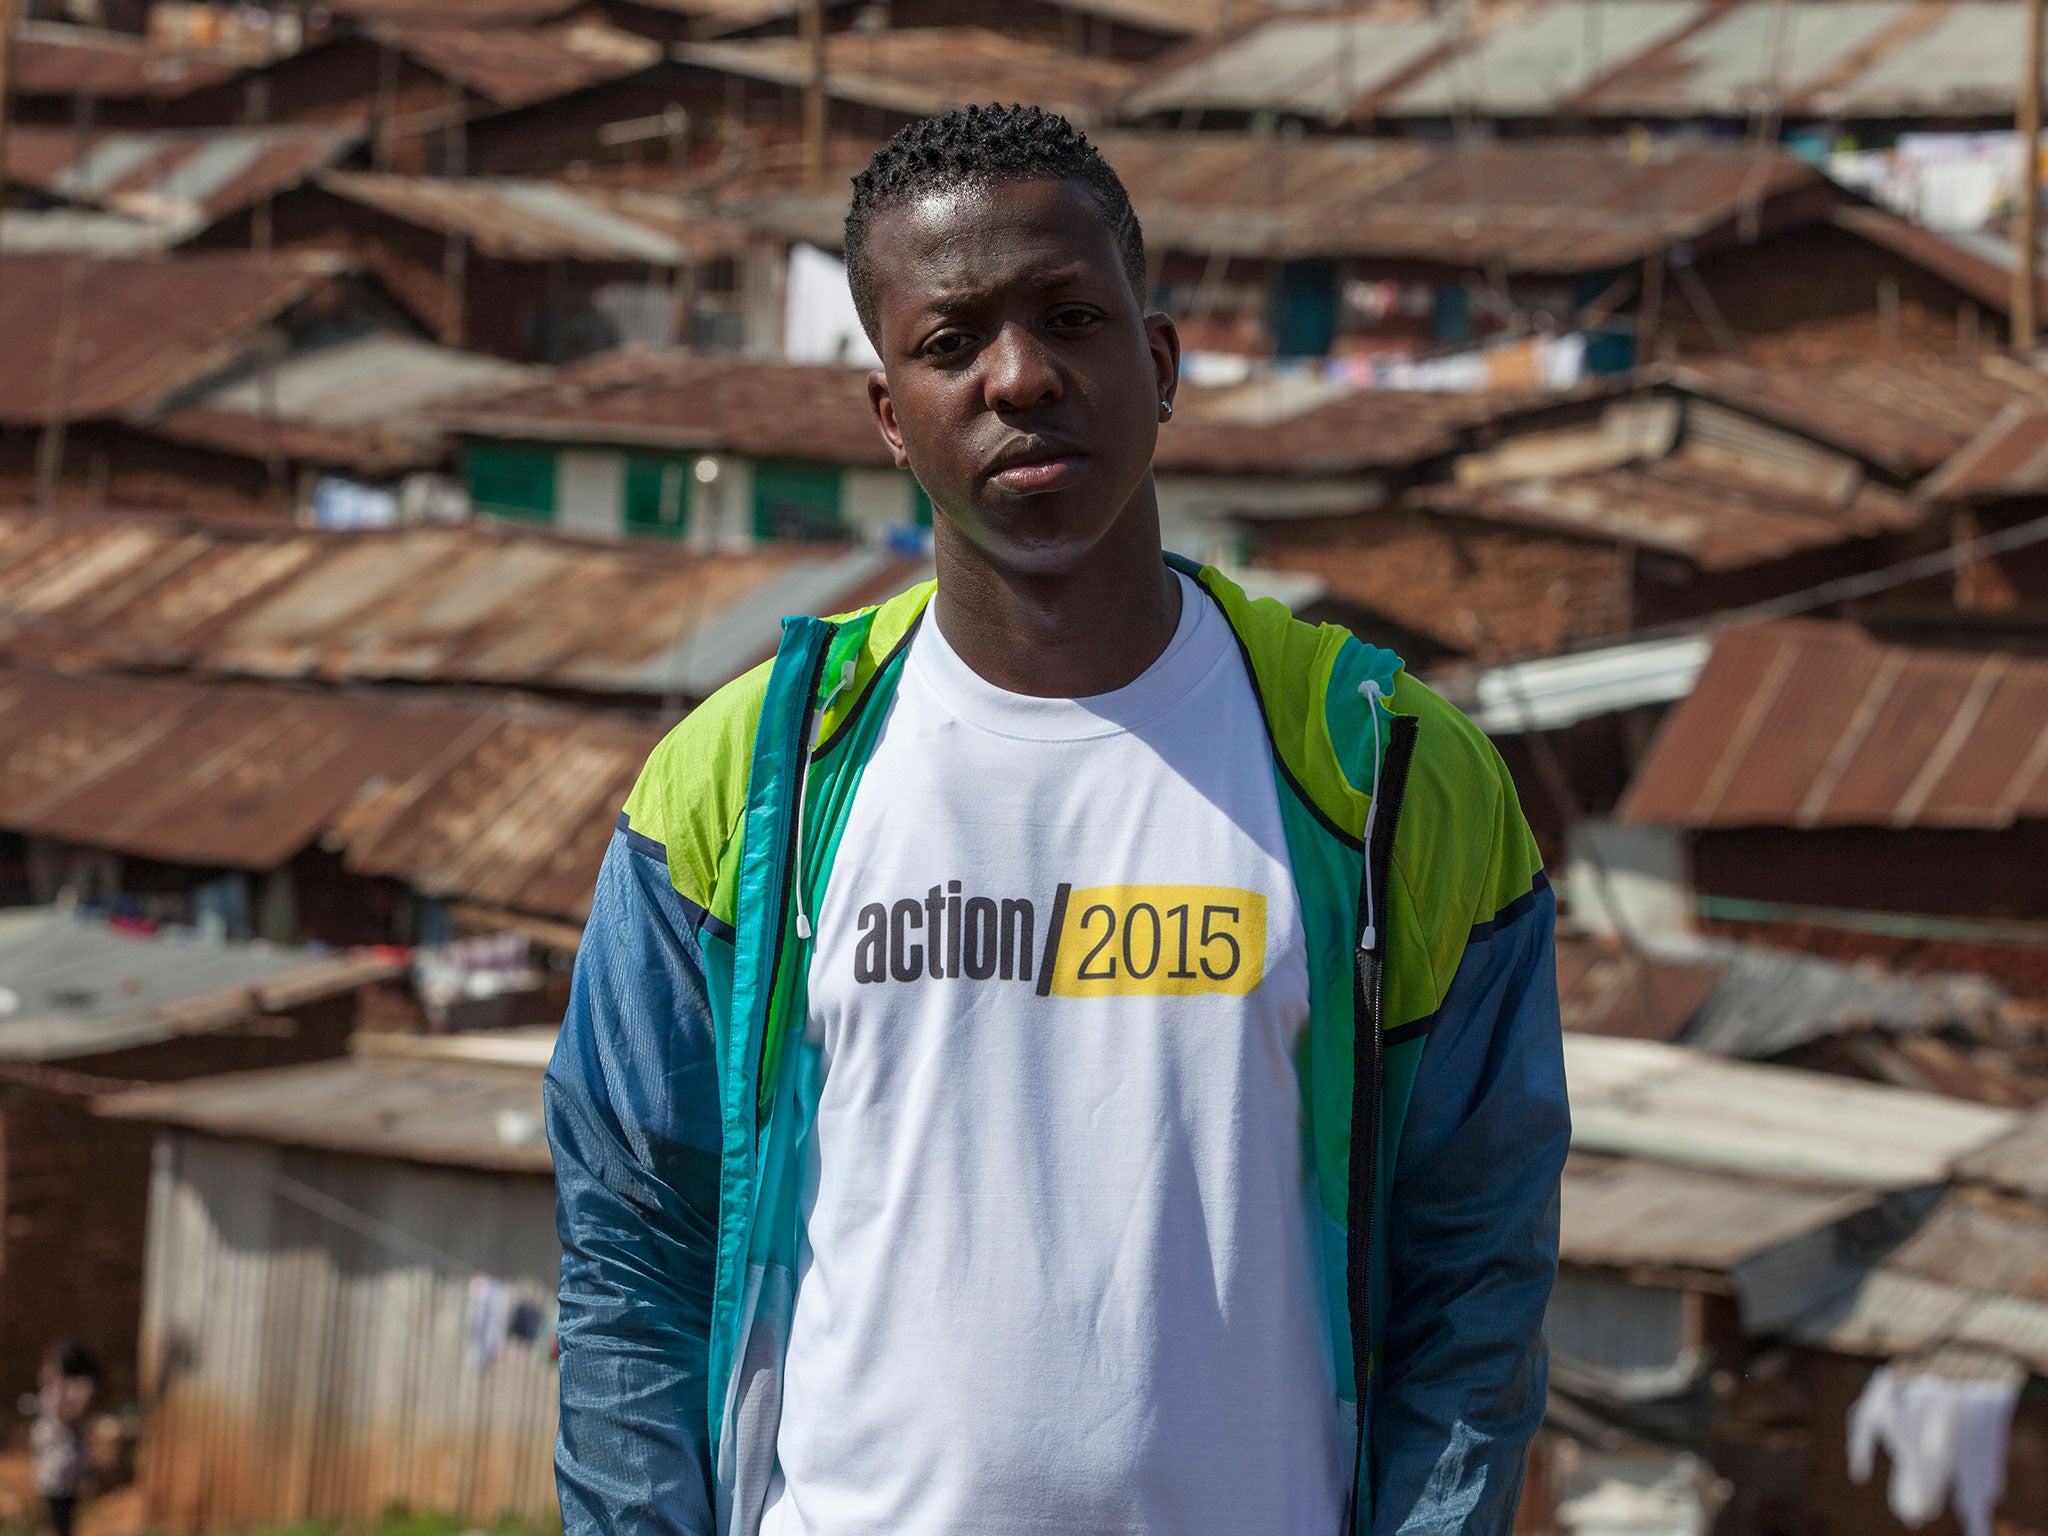 Jamal Edwards visited Kibera in support of Action 2015 in August.